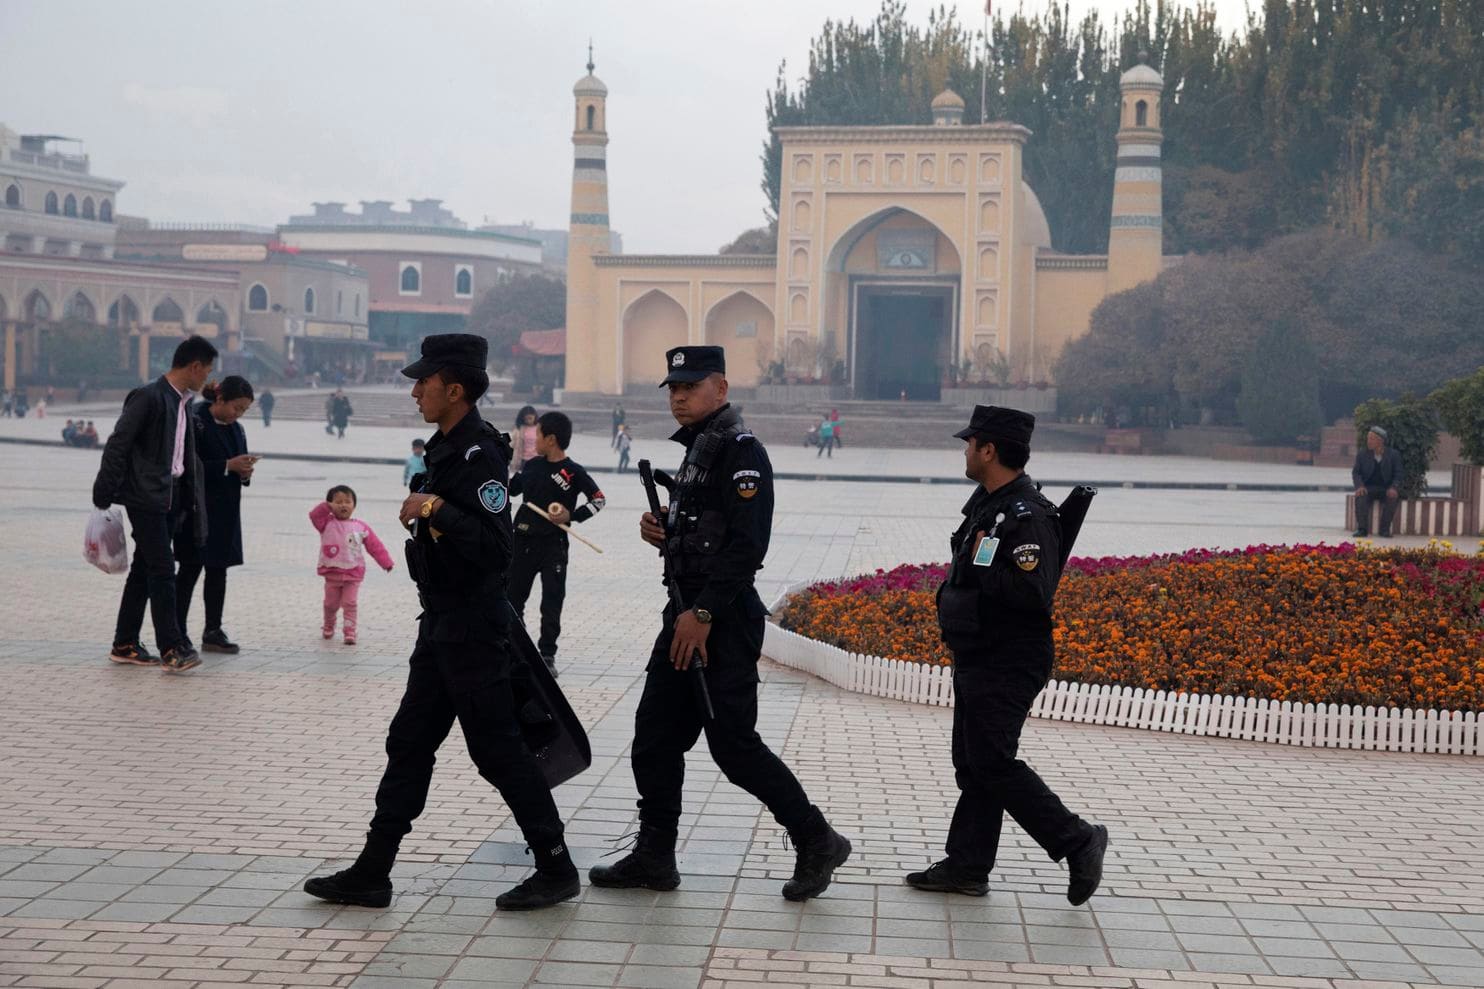 Three Australians were detained in China’s re-education camps in the past year, DFAT reports